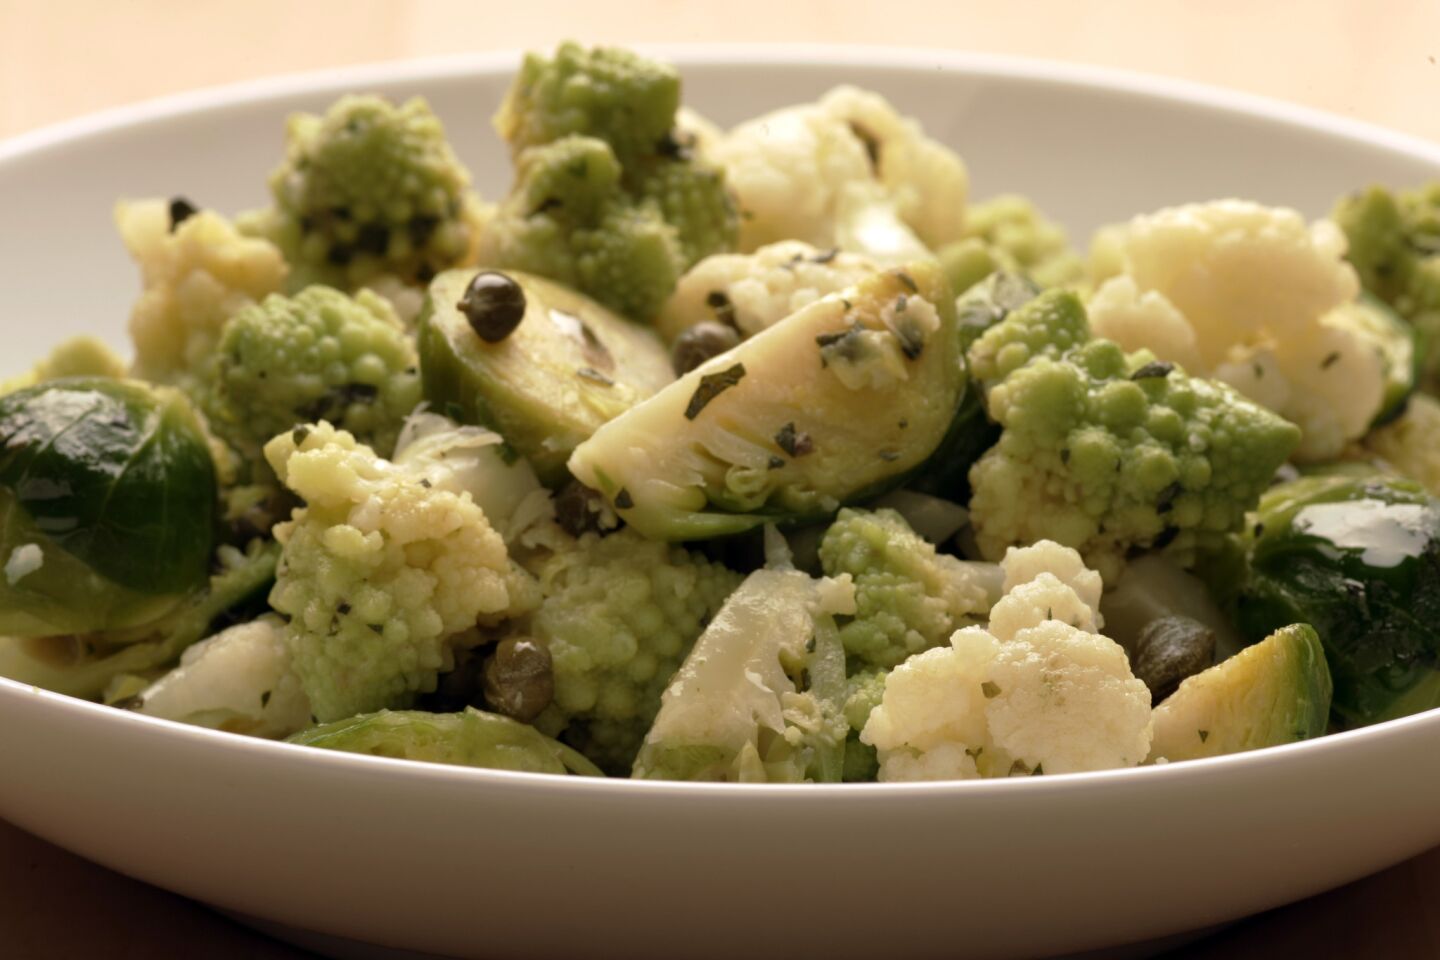 Brussels sprouts can stand up to forceful flavorings. Recipe: Cauliflower and Brussels sprout salad with mustard-caper butter